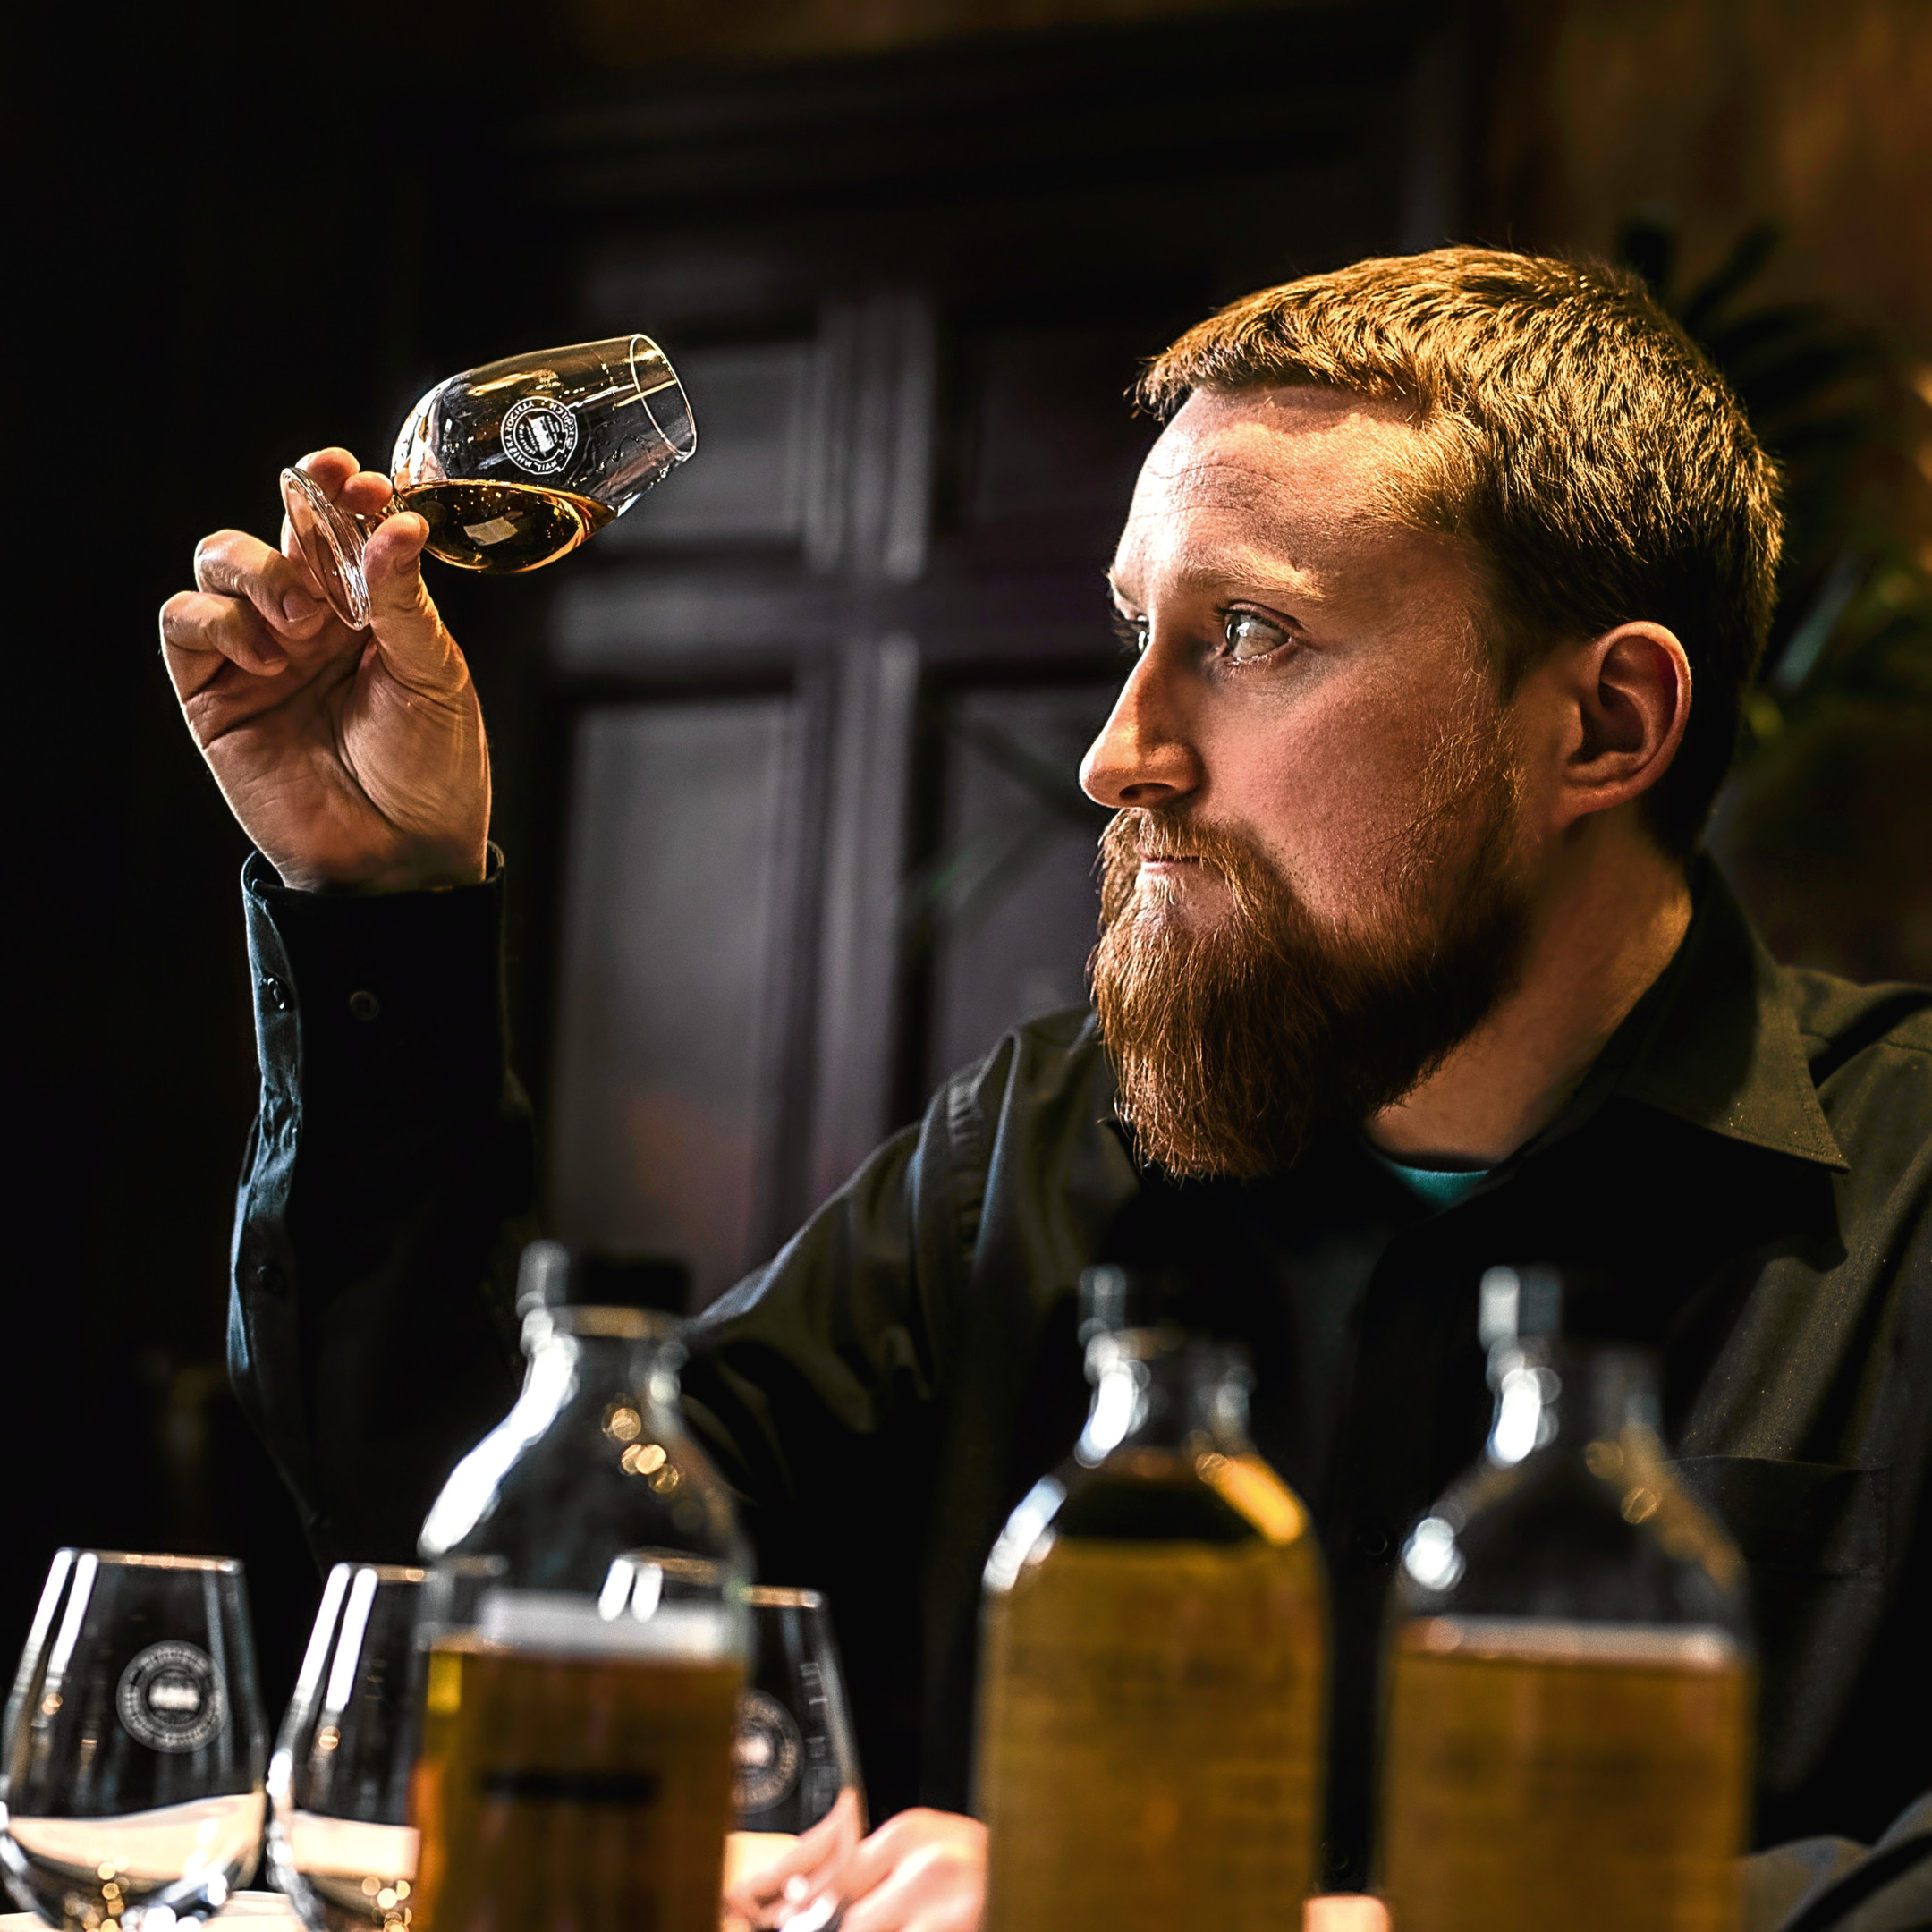 Euan Campbell, Spirits Manager at the Scotch Malt Whisky Society